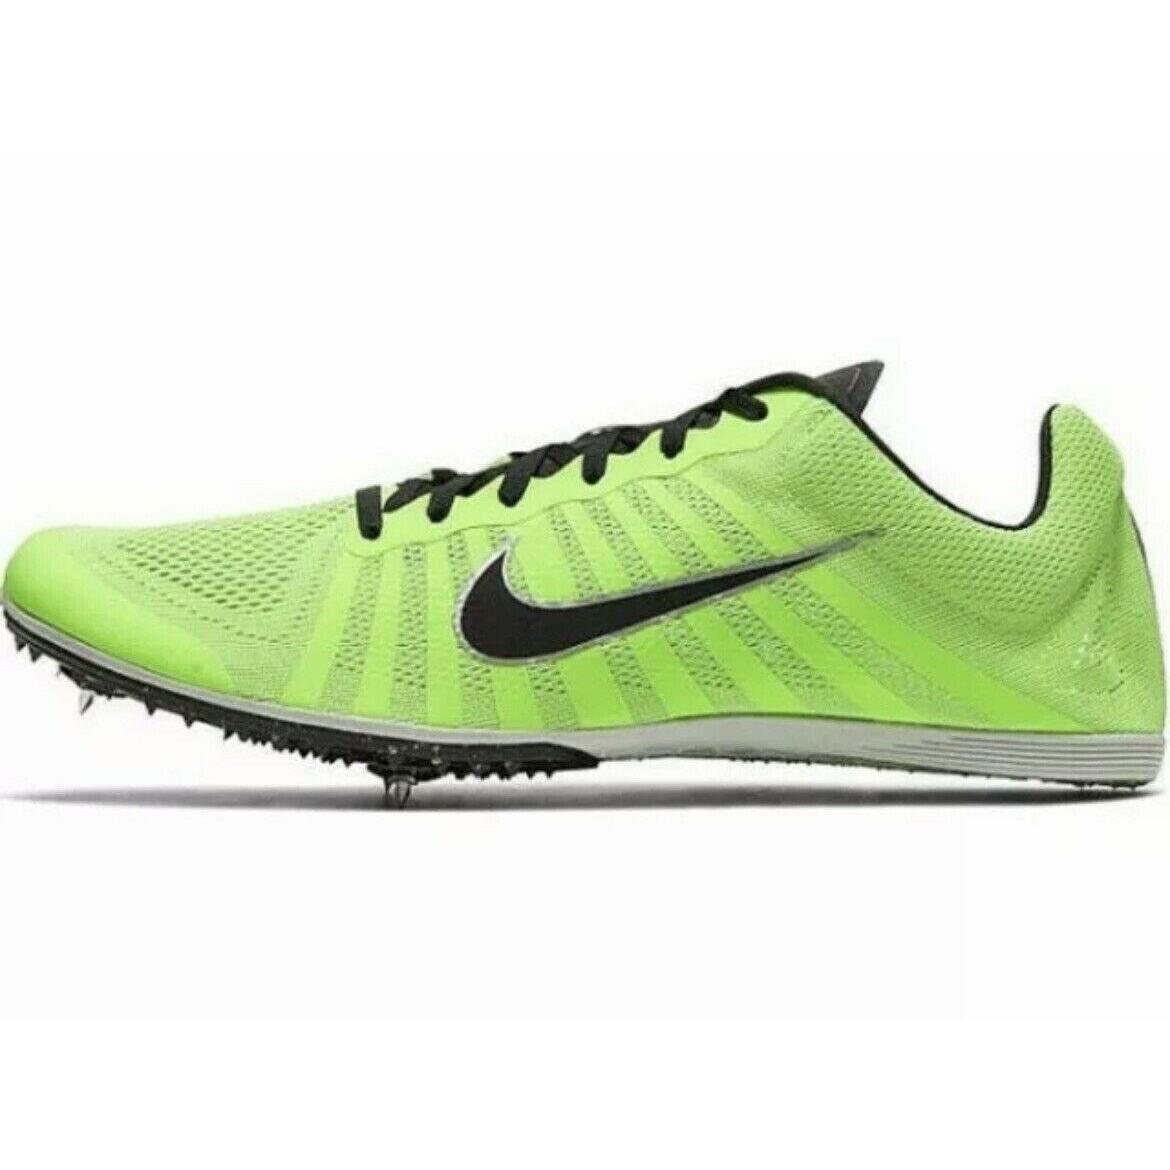 Nike Men`s Zoom D Track Spikes Distance Running Shoe Neon 819164-300 Size 12.5